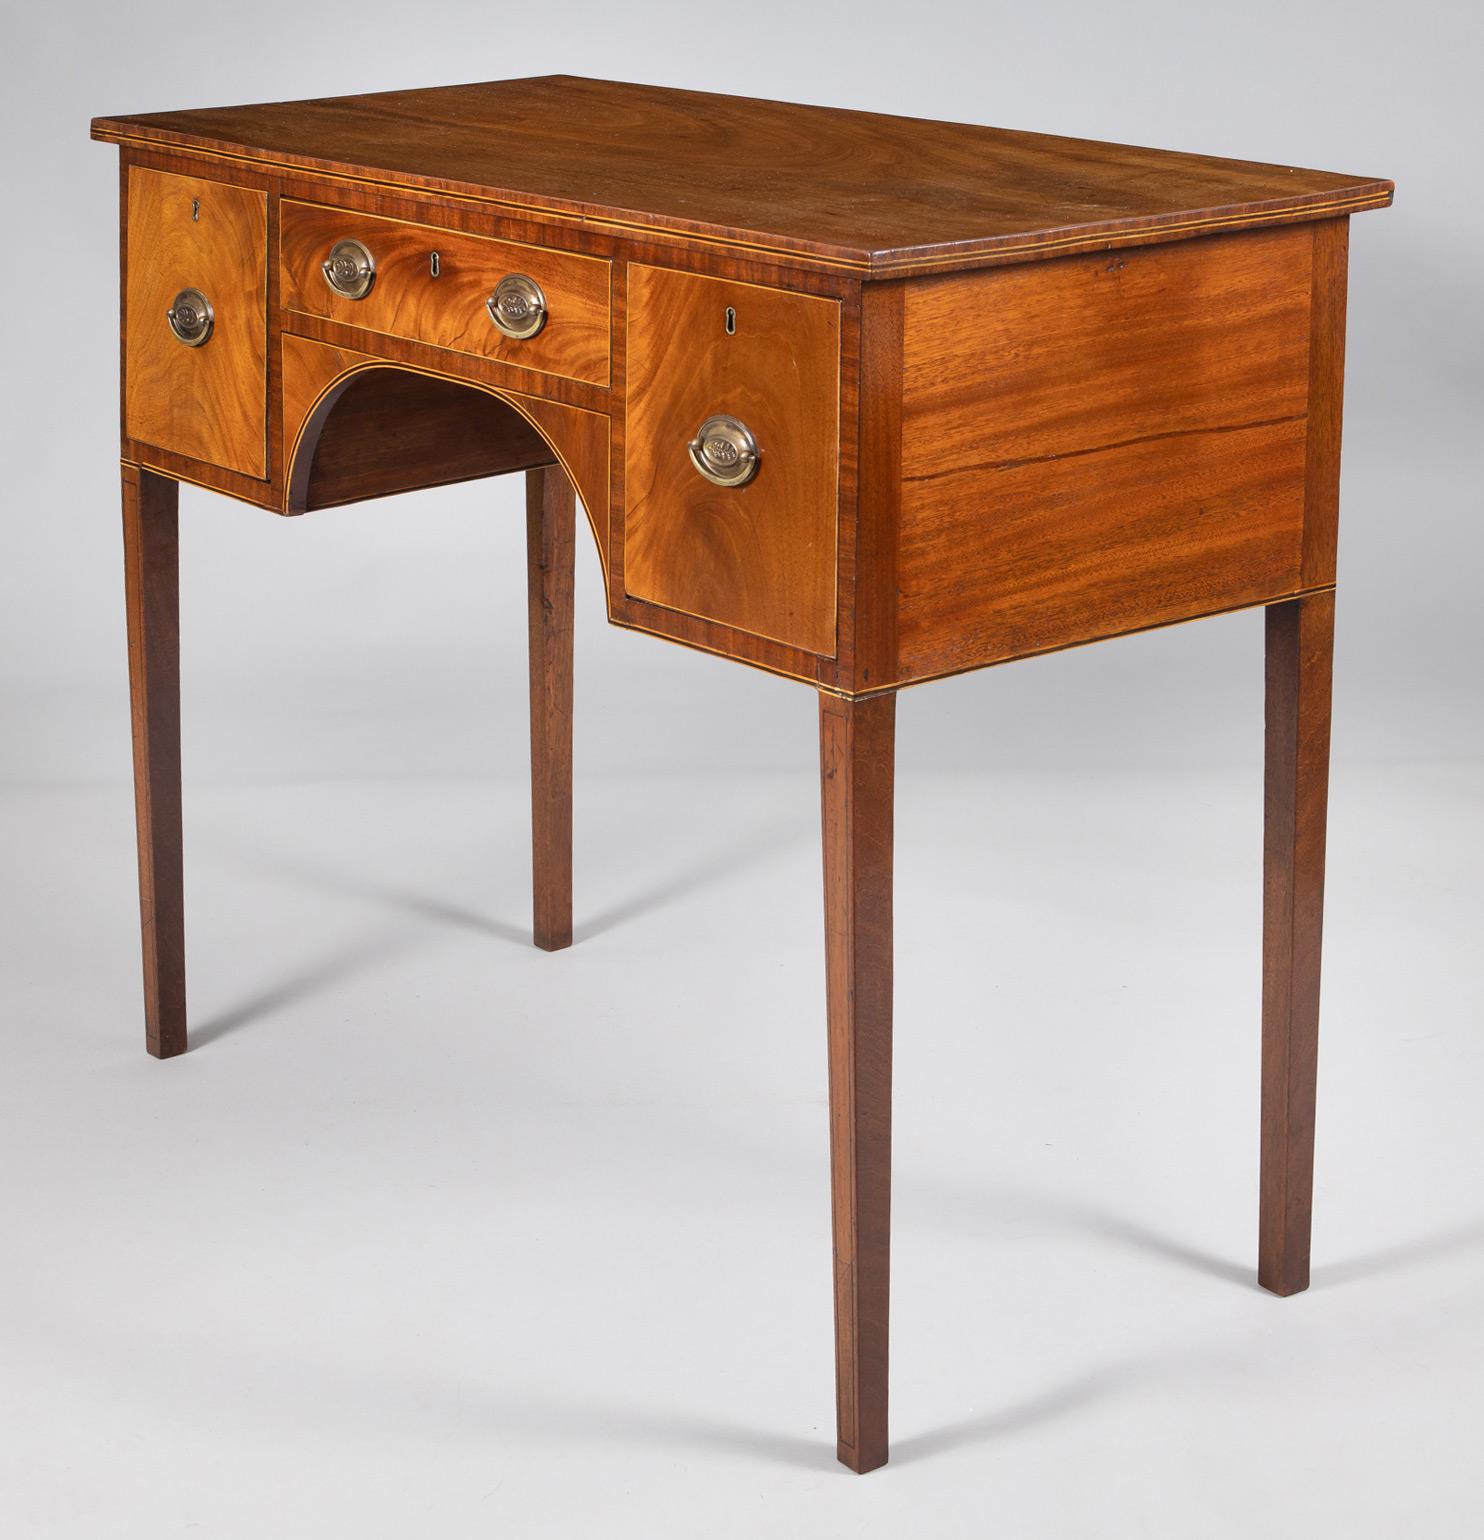 George III mahogany small sideboard with boxwood and ebony stringing around the top edge, above a central frieze drawer and kneehole flanked by two deep drawers, all outlined with boxwood and ebony stringing, the drawers with brass oval handles and